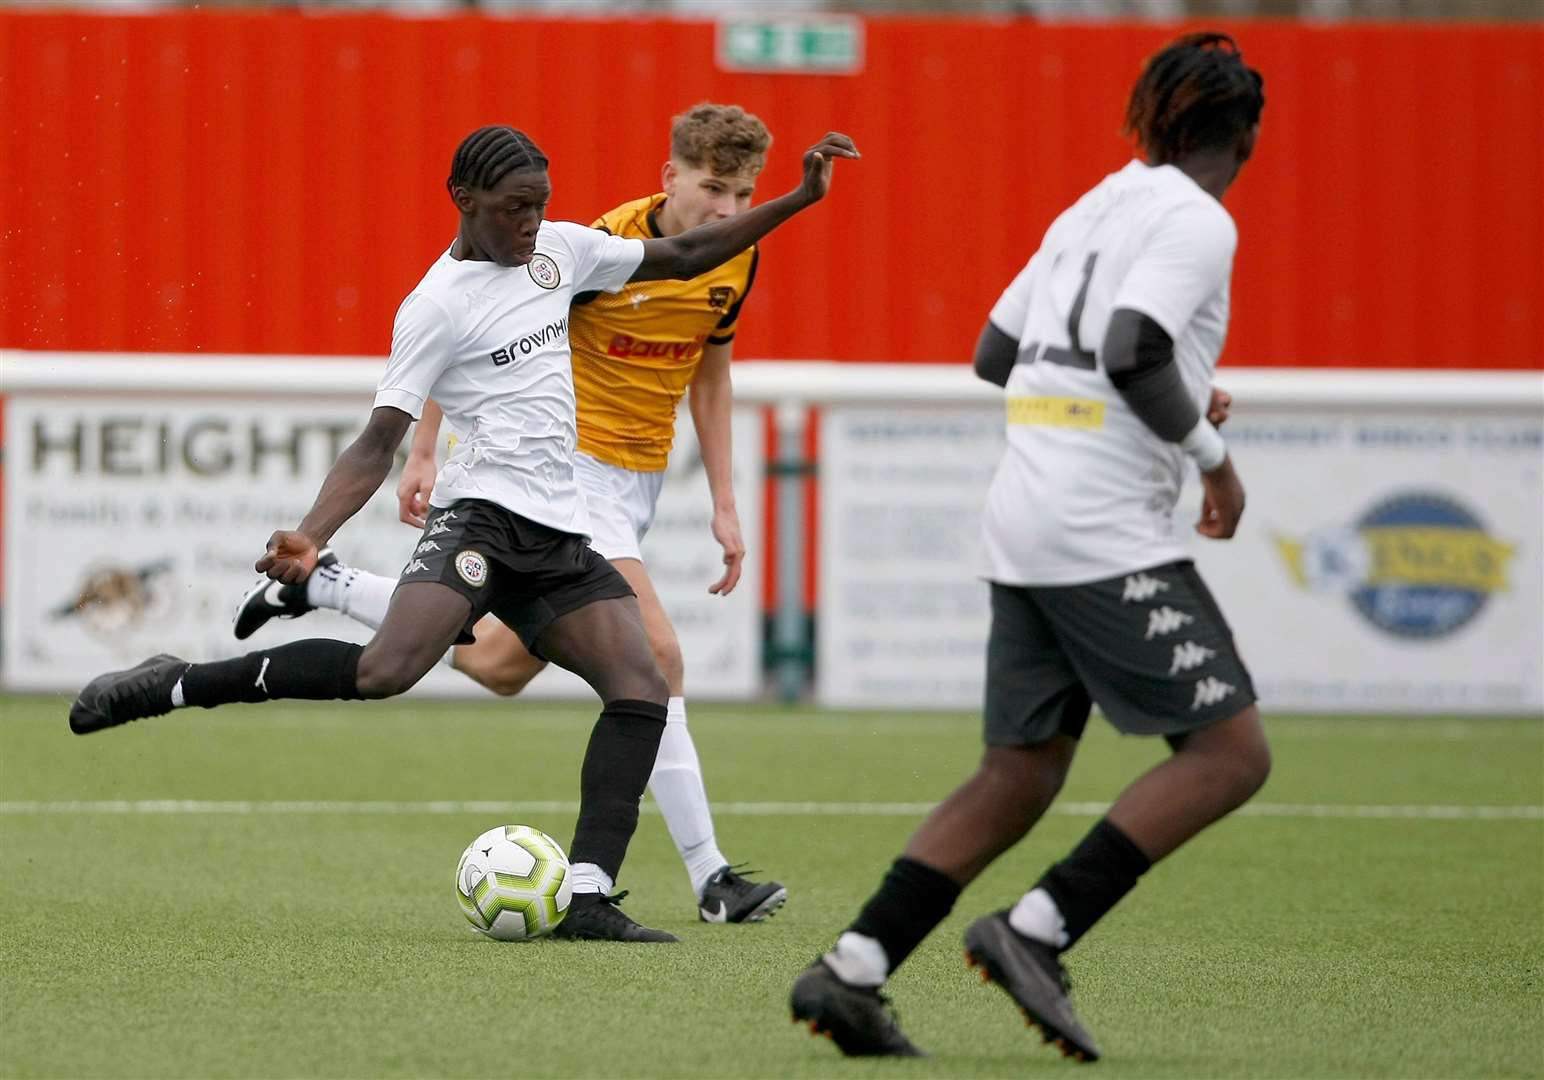 Ashley Tshitenga puts Bromley ahead in extra-time on Sunday. Picture: PSP Images